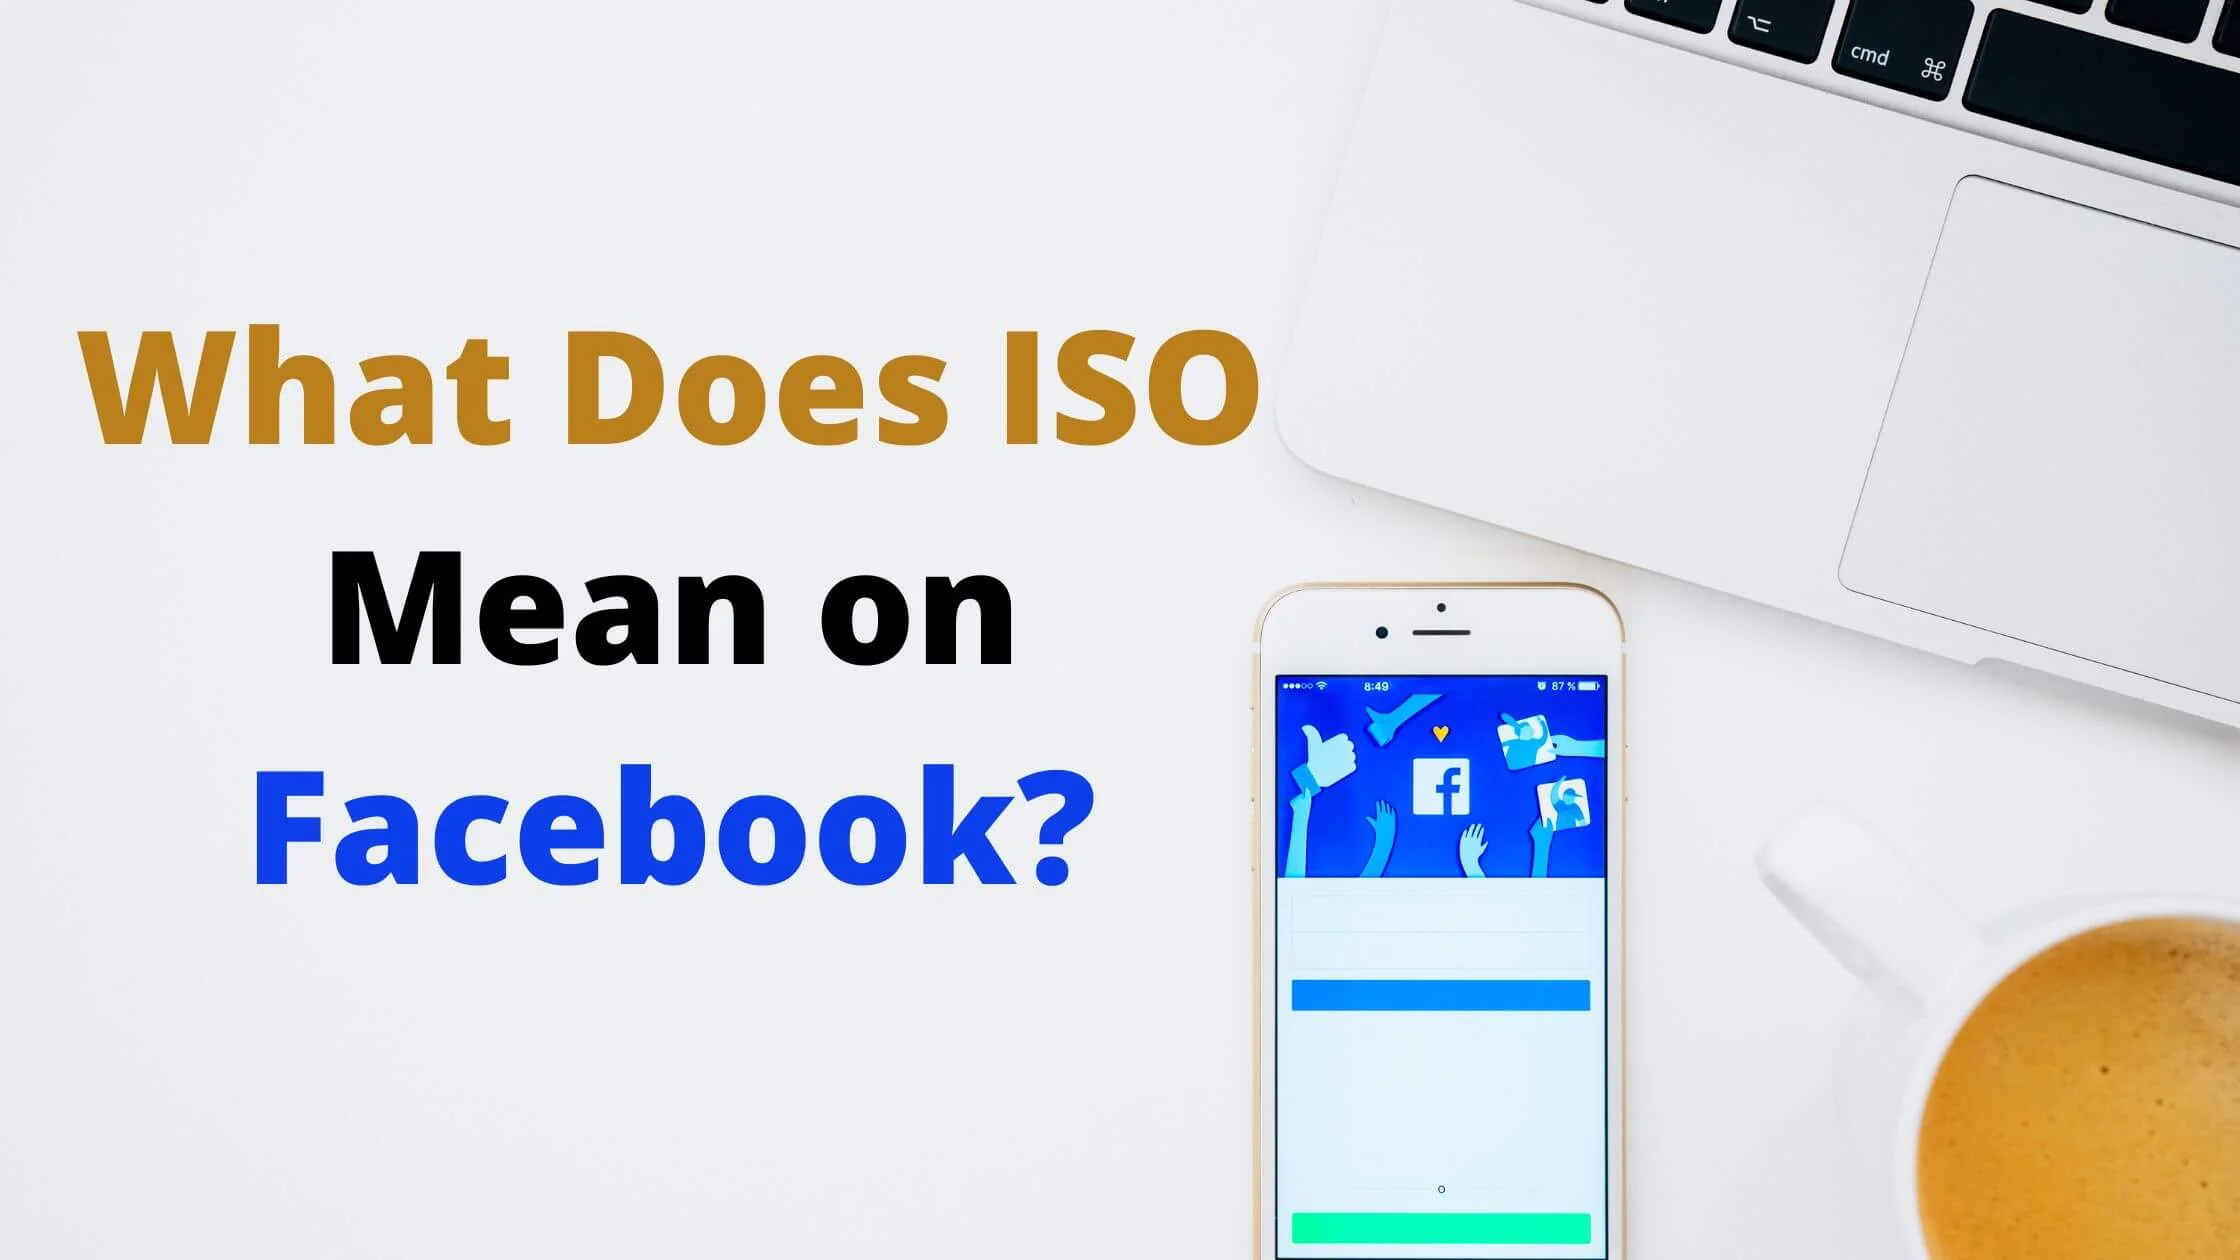 What Does ISO Mean on Facebook